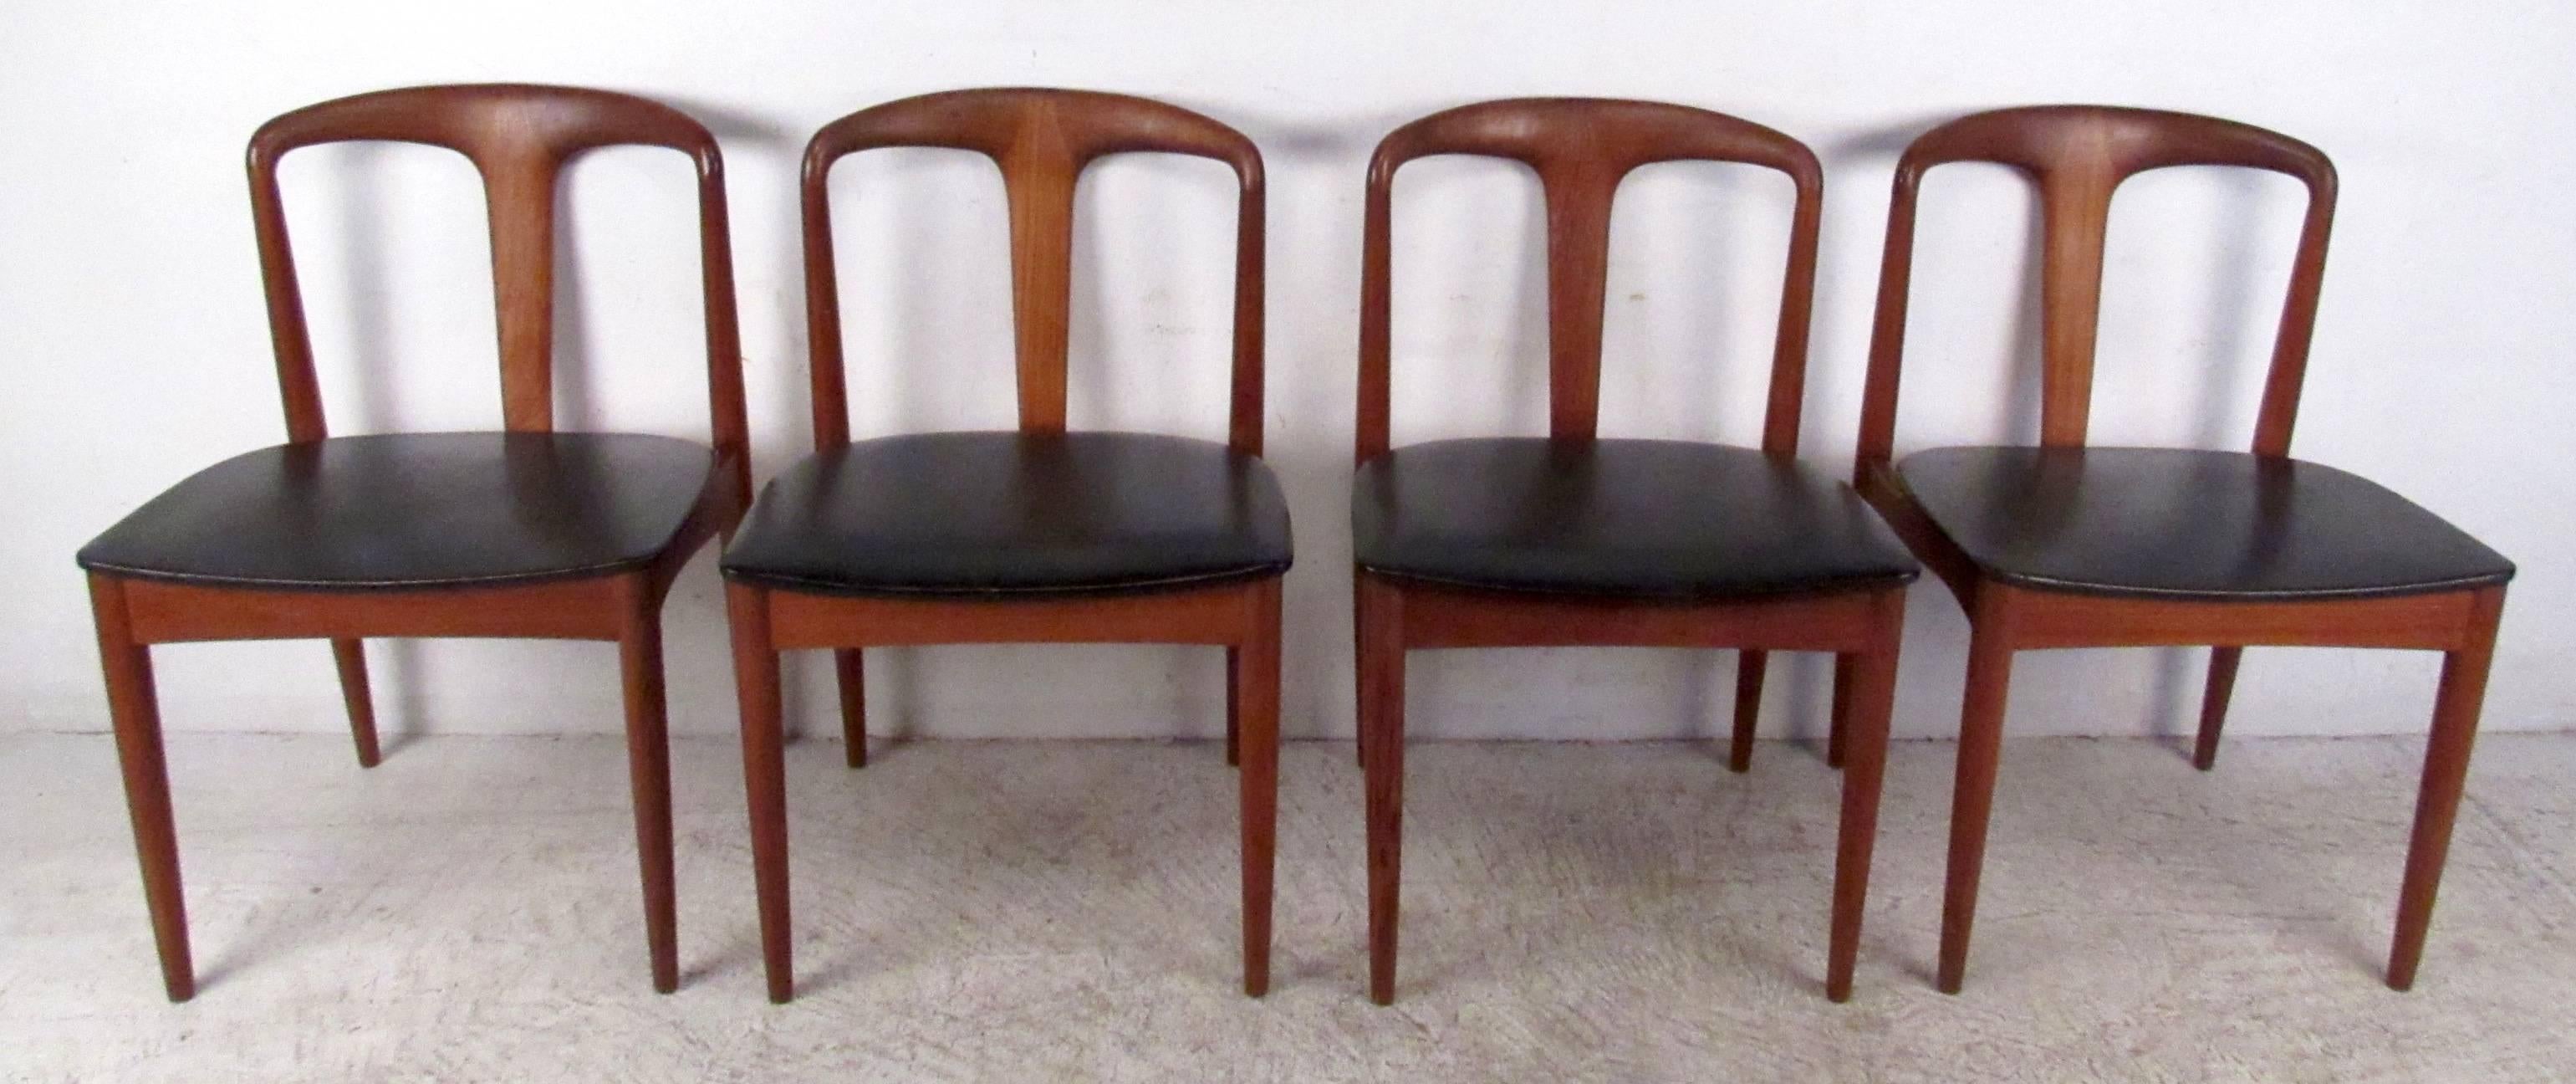 Set of vintage modern teak dining chairs manufactured in Denmark by Vamo Sonderborg. A unique design that boasts arched backrests with a single slat in the center and tapered legs. A thick padded seat covered in black vinyl ensures maximum comfort